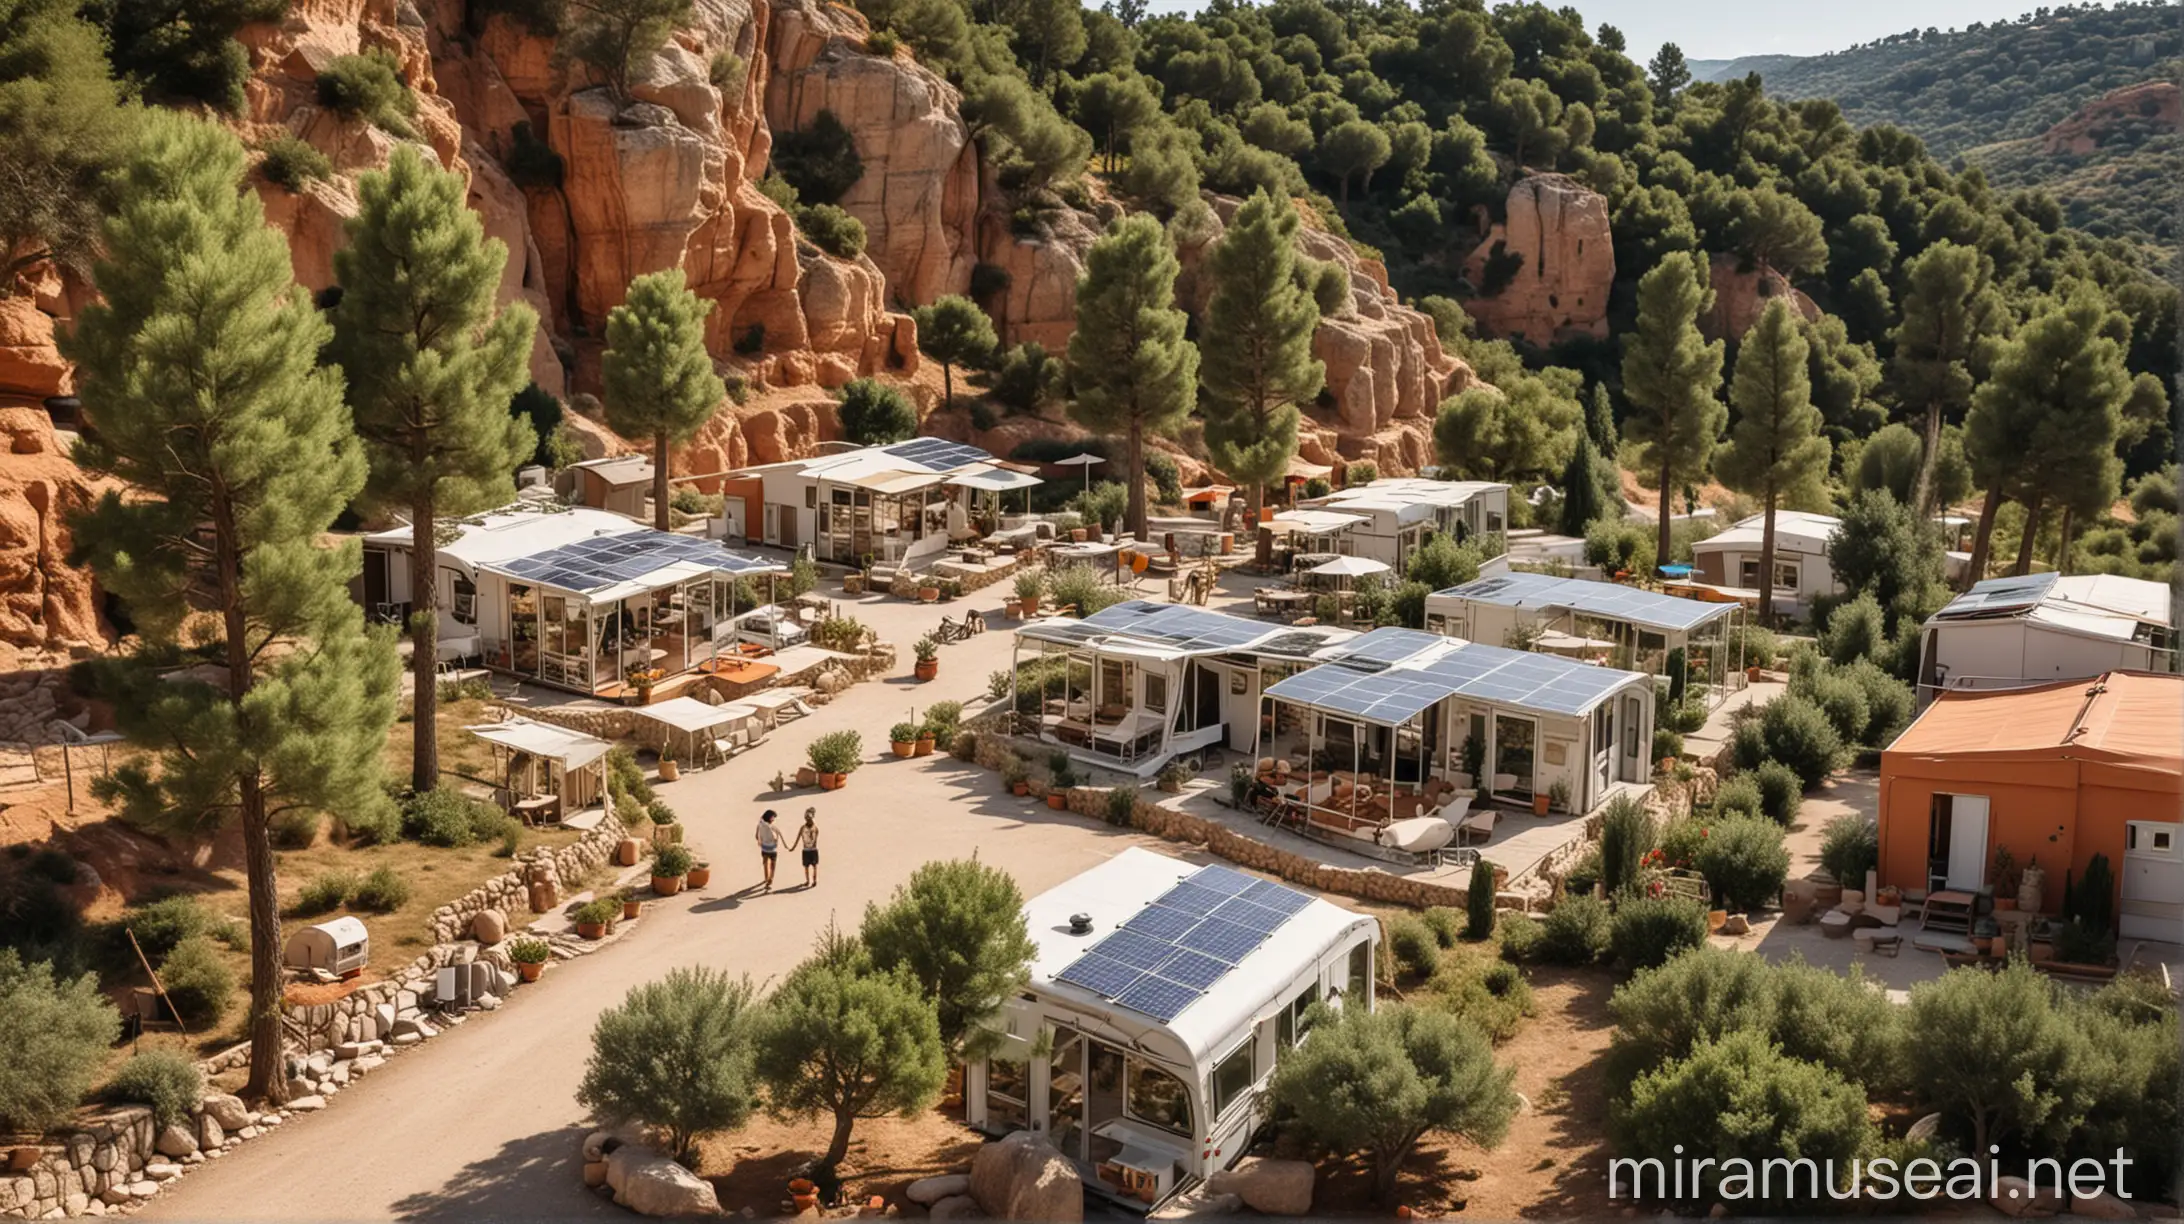 EcoFriendly Mediterranean Camping Site with SolarPowered Bungalows and Cozy Coworking Space